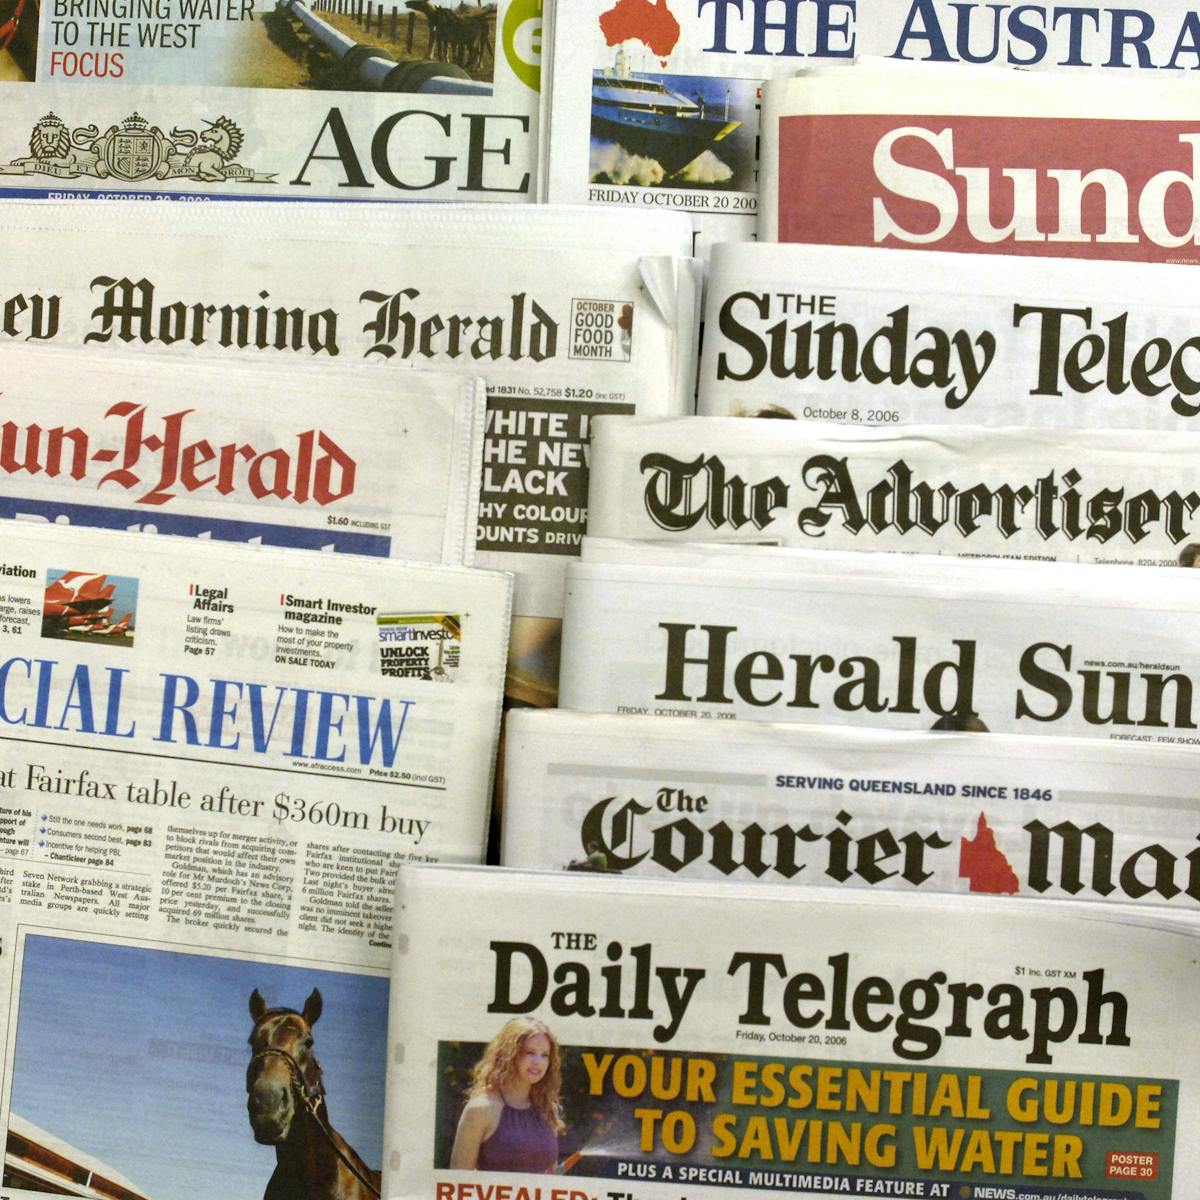 Newspapers are dying, but long live the news